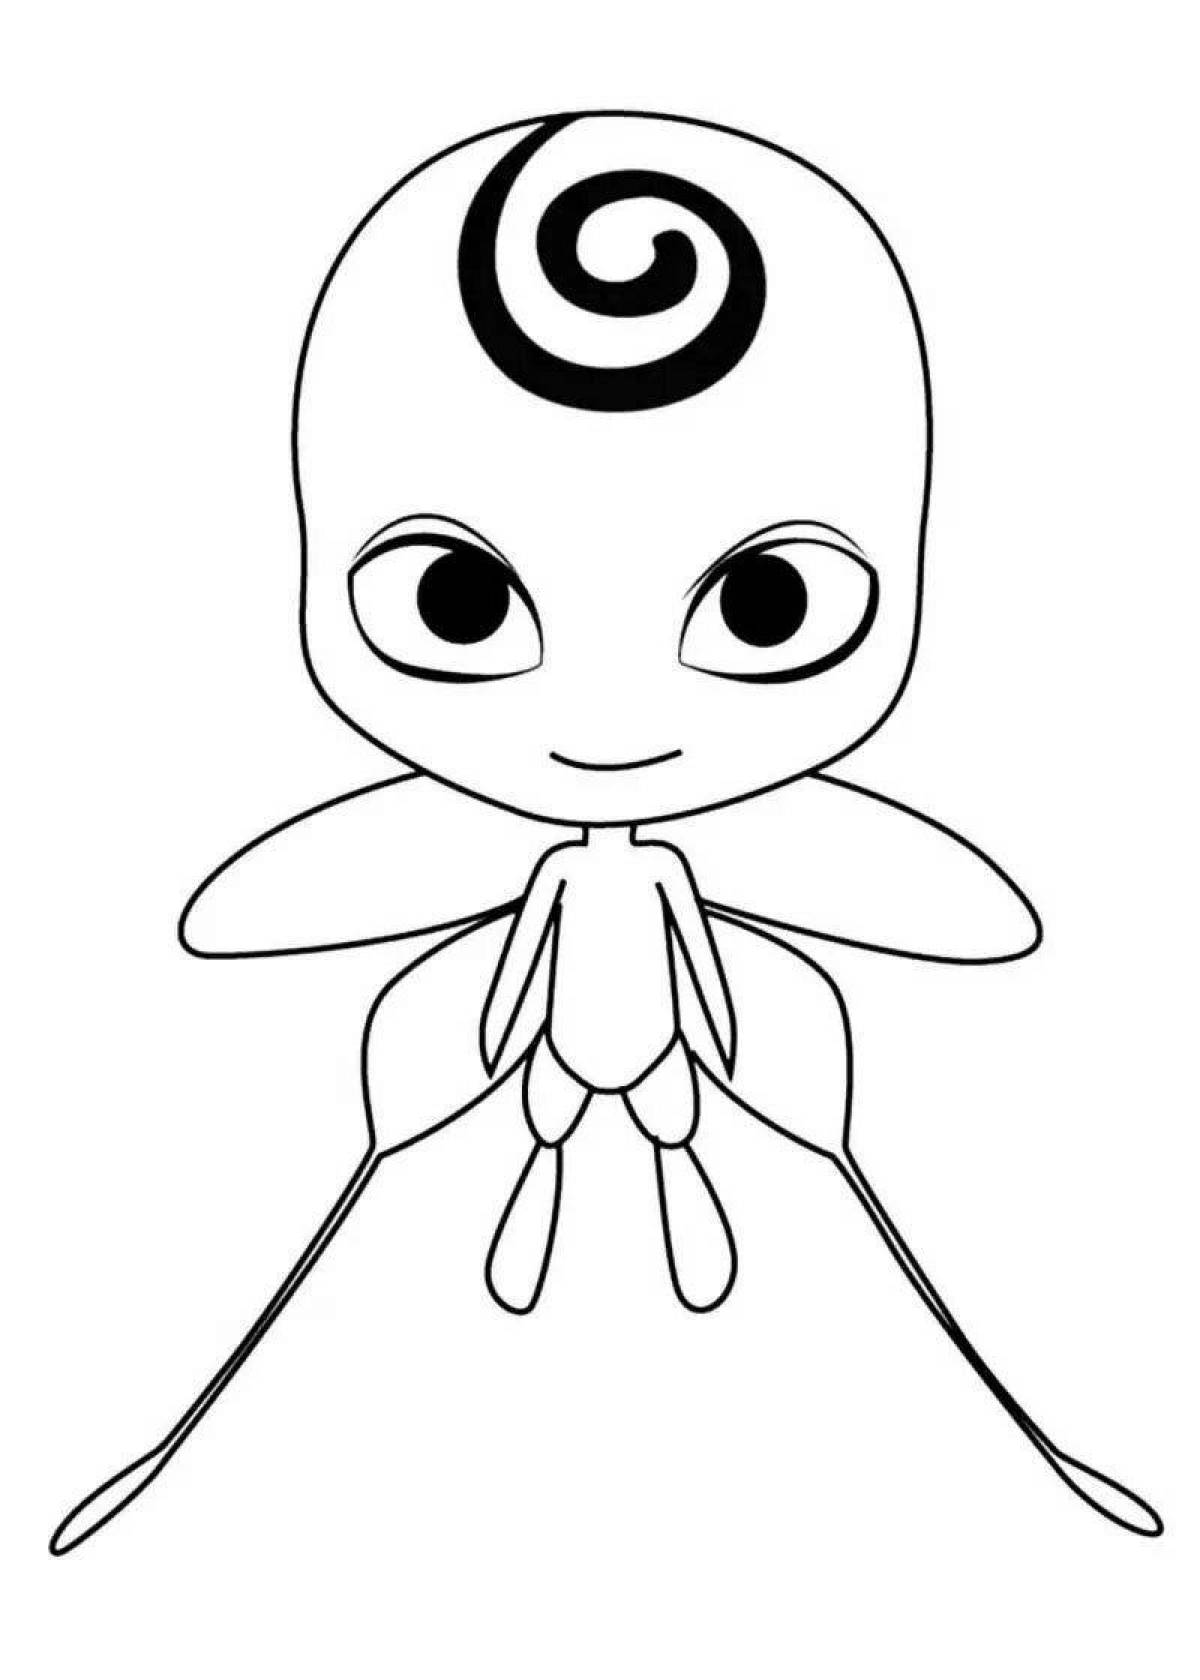 Bright mayura from the ladybug coloring page